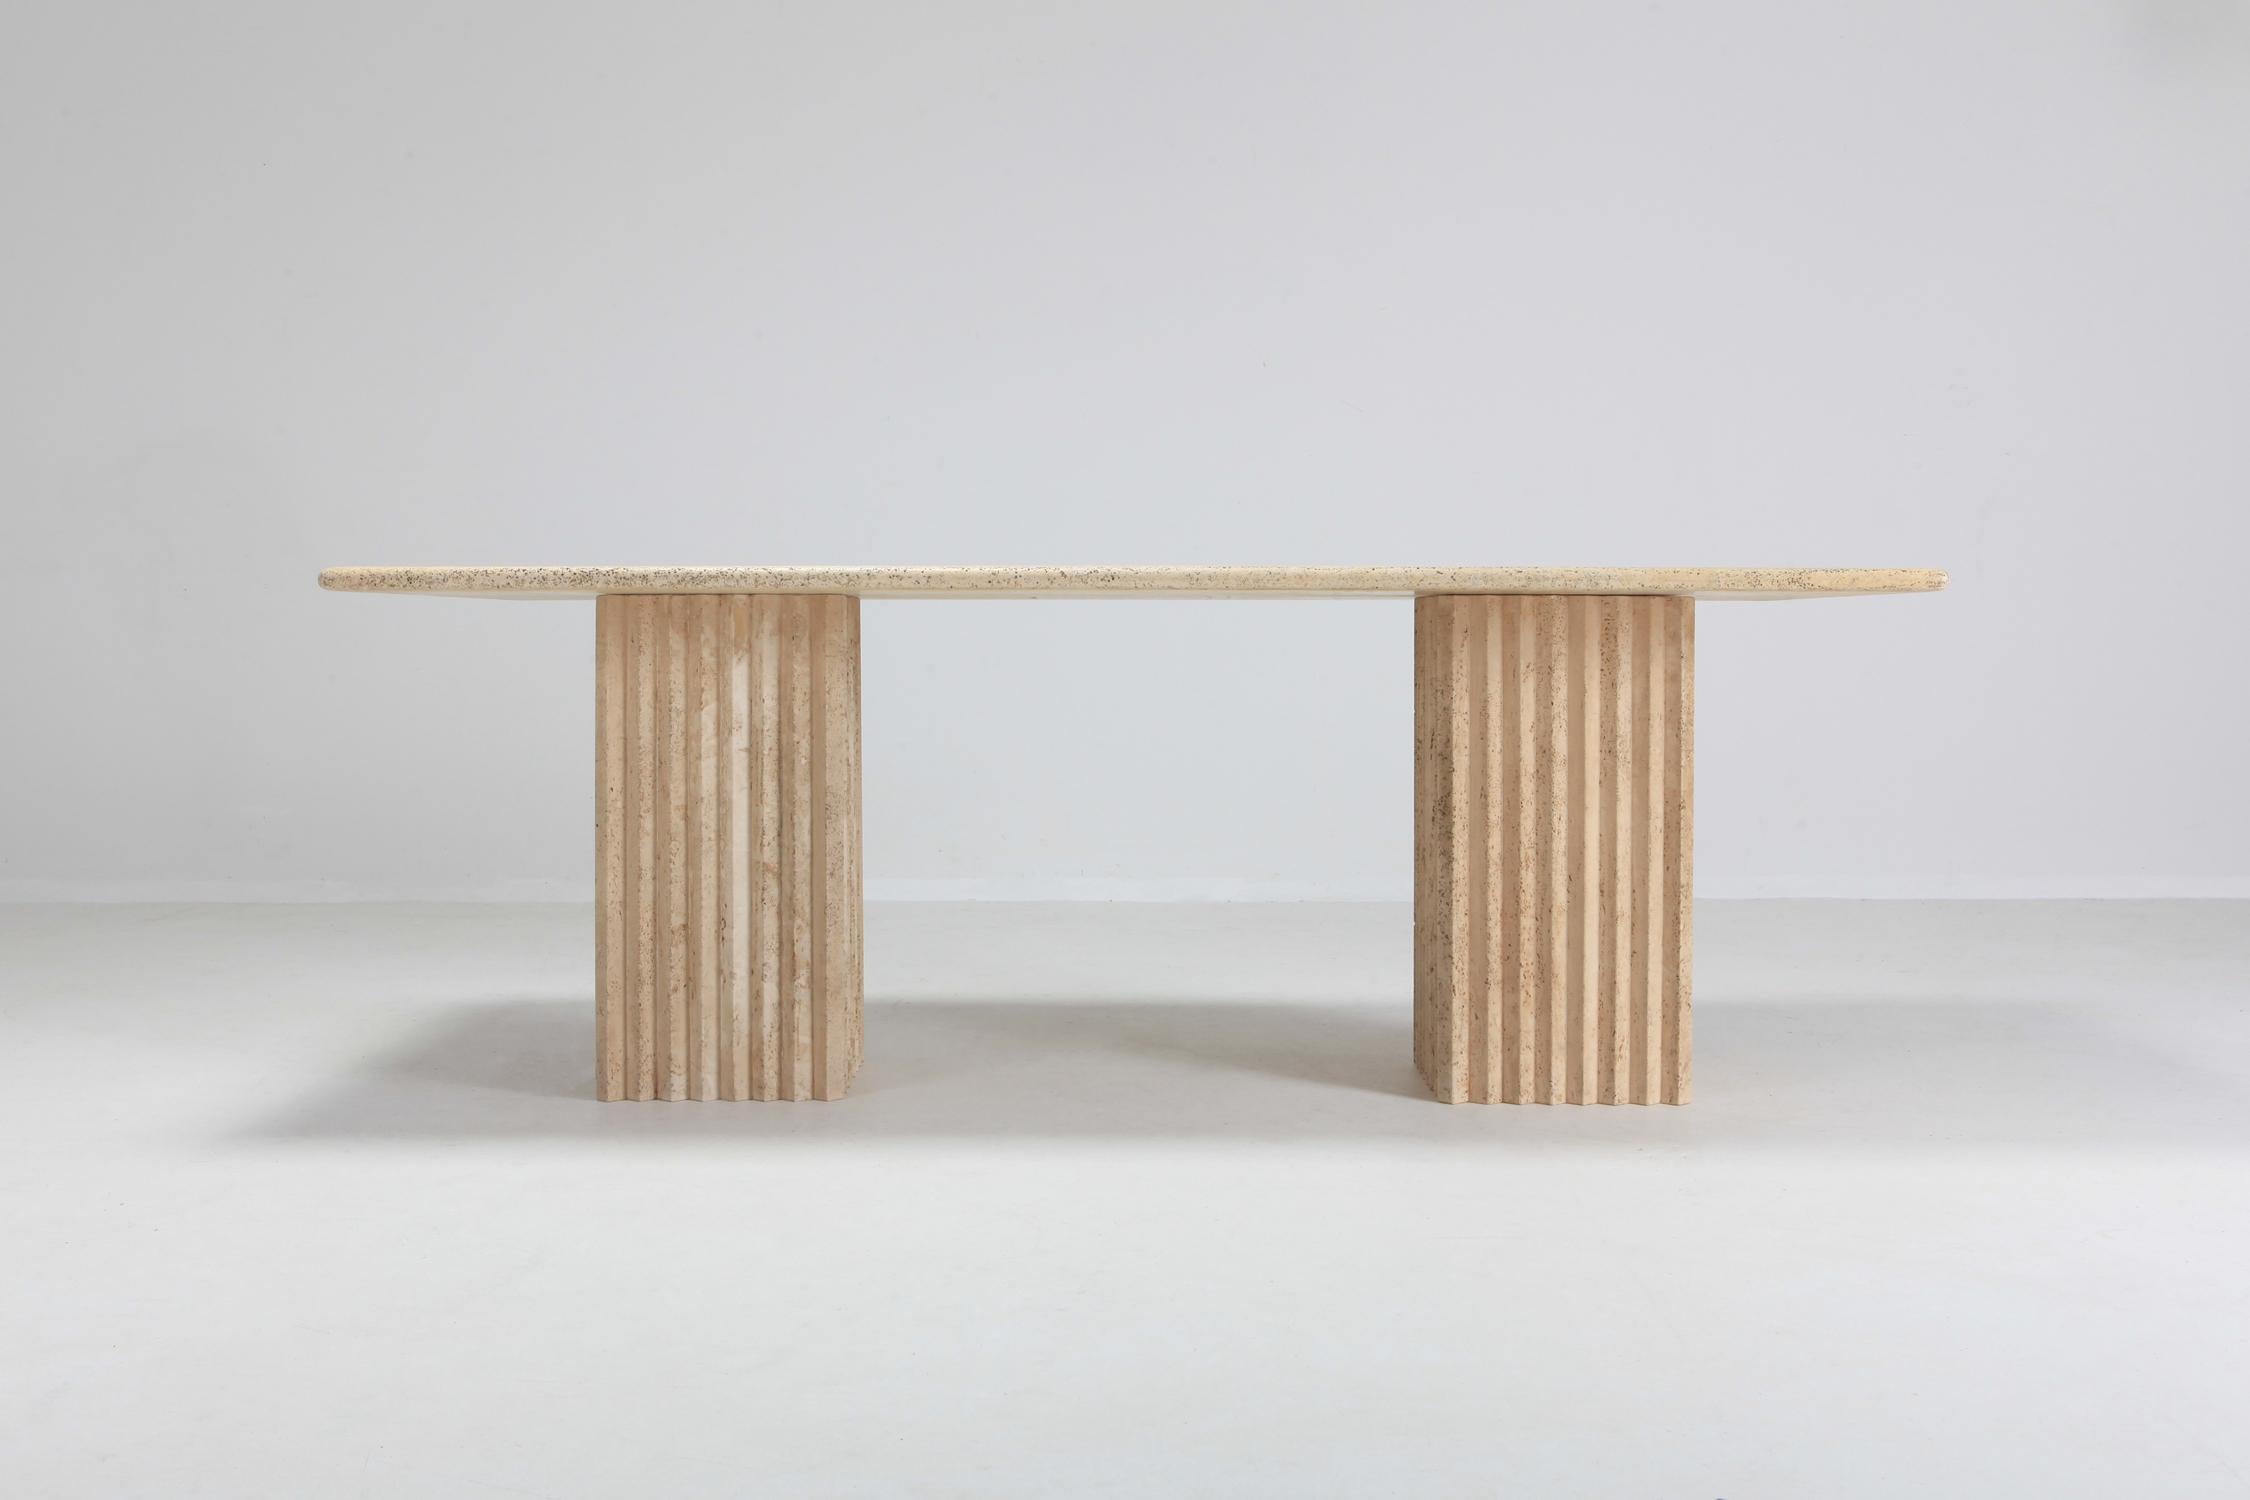 Postmodern table, travertine marble, attributed to Carlo Scarpa, Italy, 1970s

can be used as a writing desk or dining table.

The two impressive columns are not attached to the table, these can be placed freely underneath the top. You could